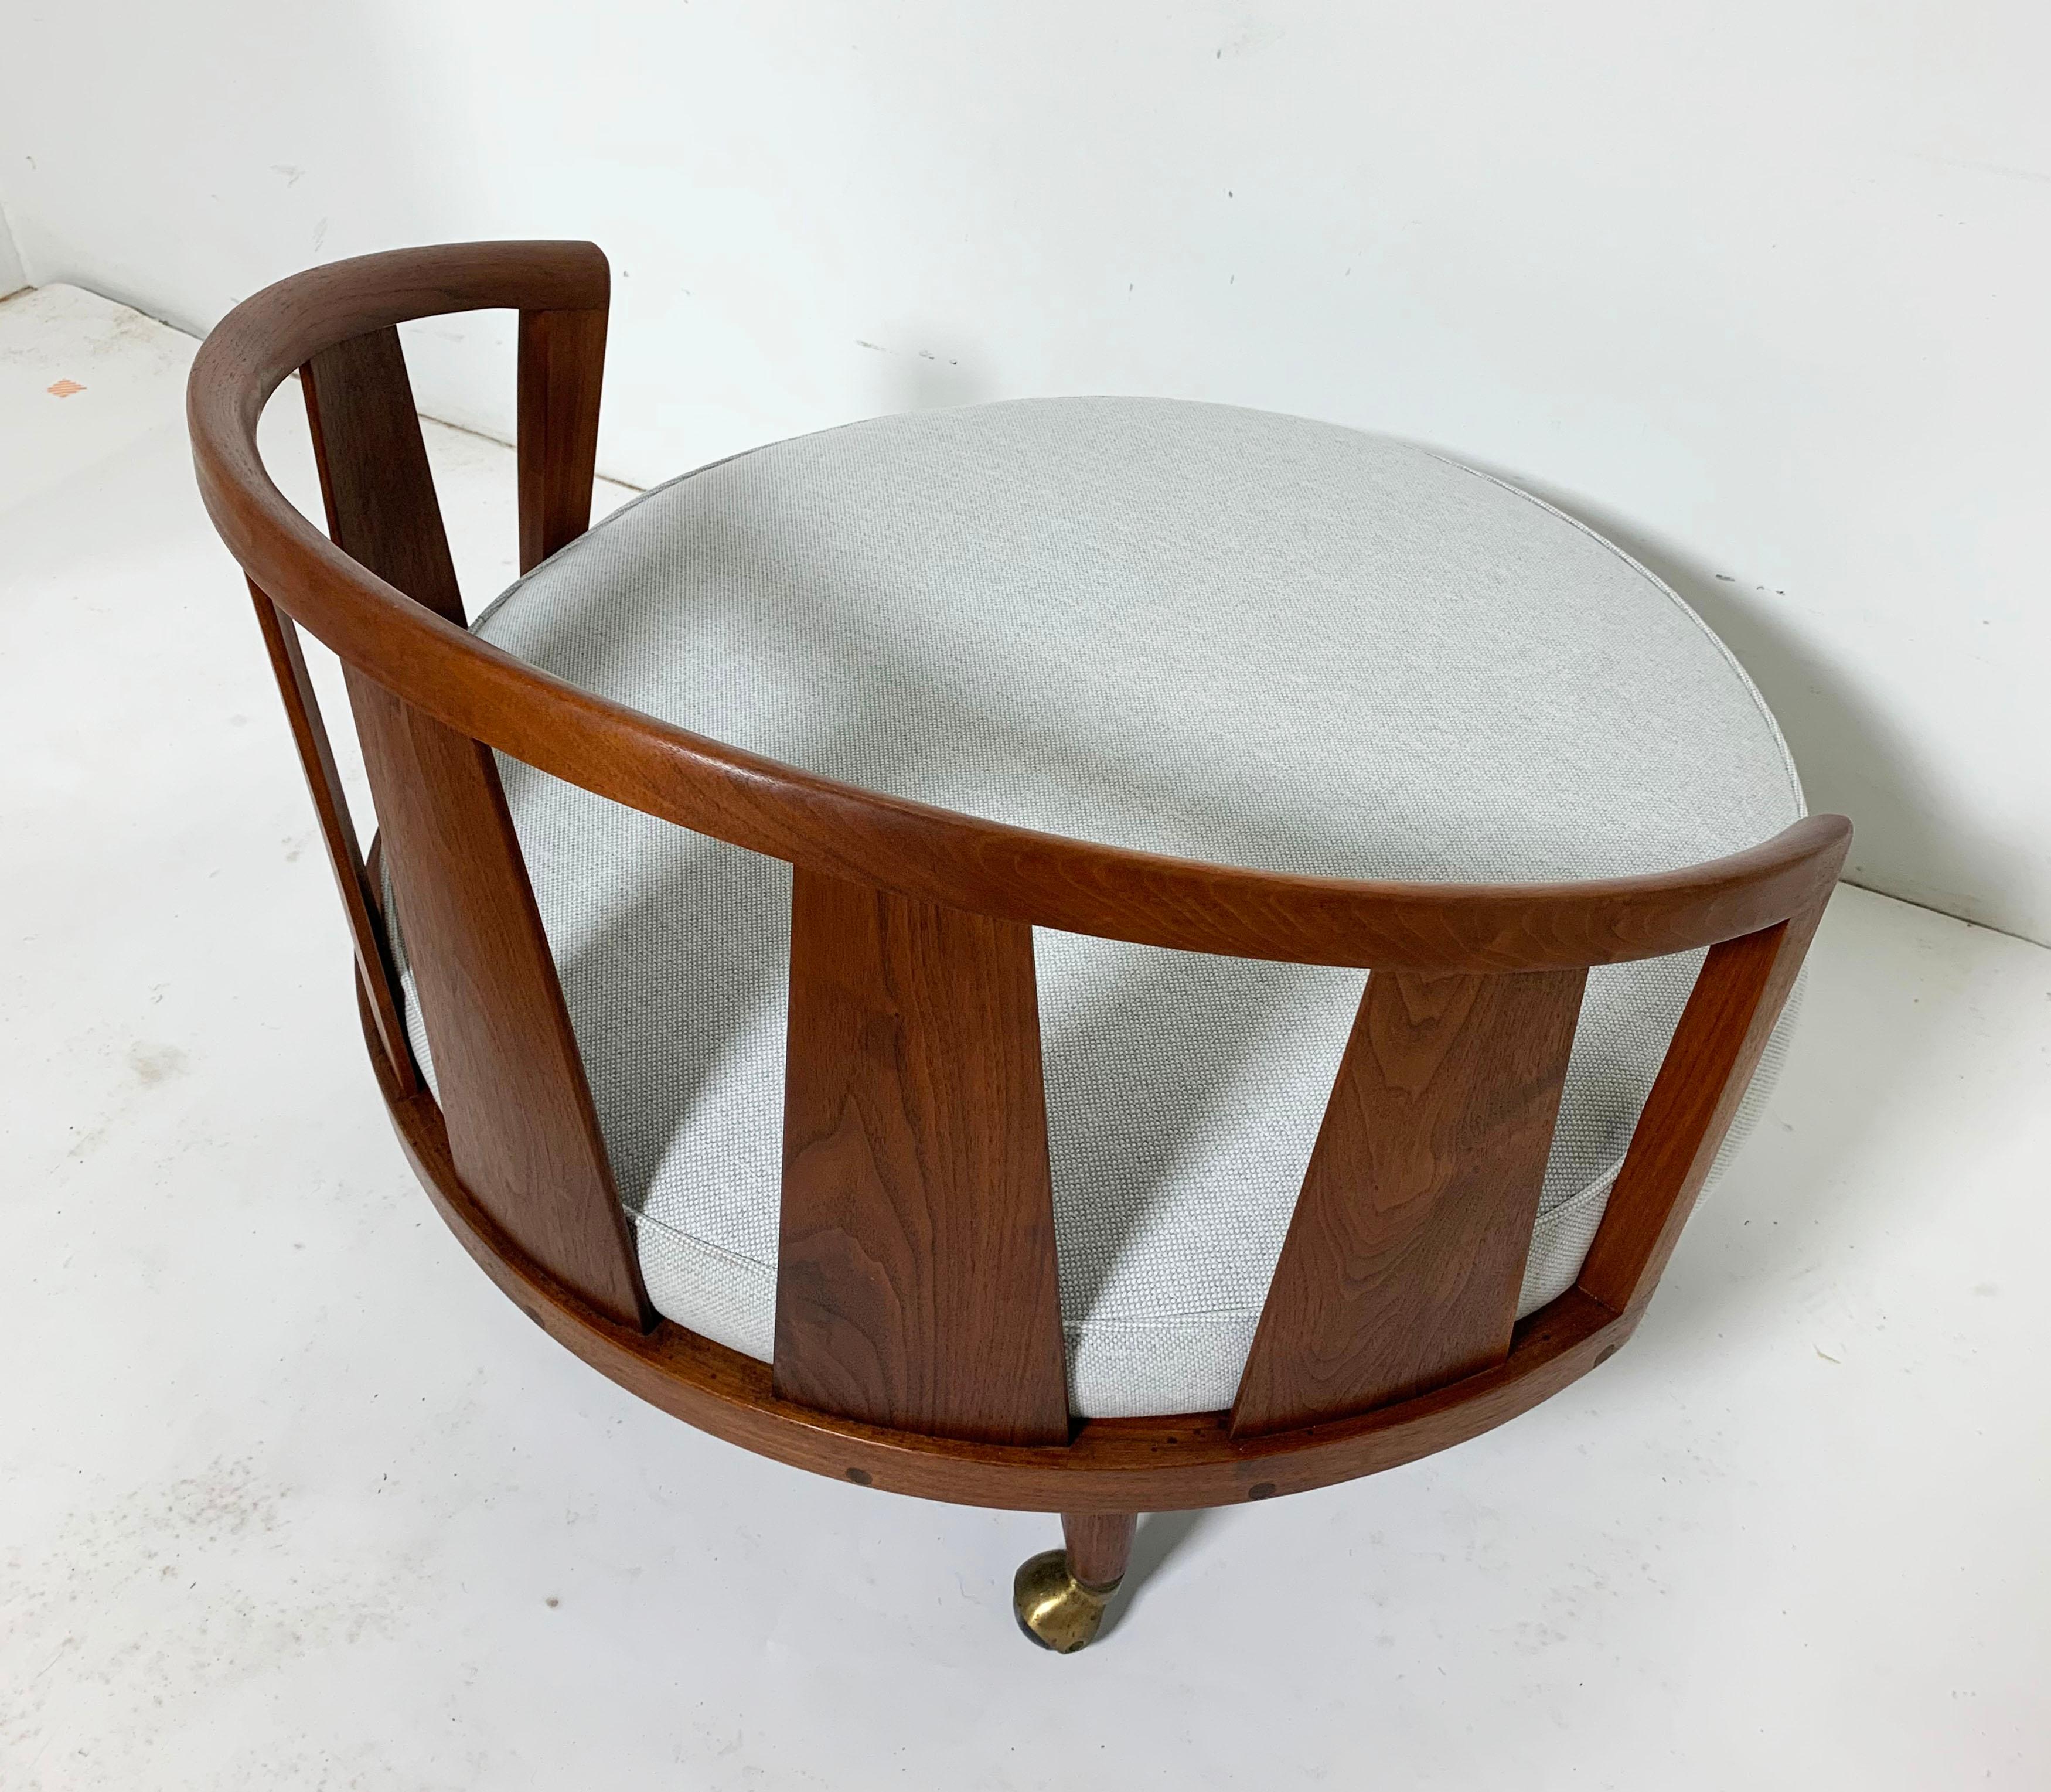 Upholstery Adrian Pearsall for Craft Associates “Havana” Lounge Chair, circa 1960s